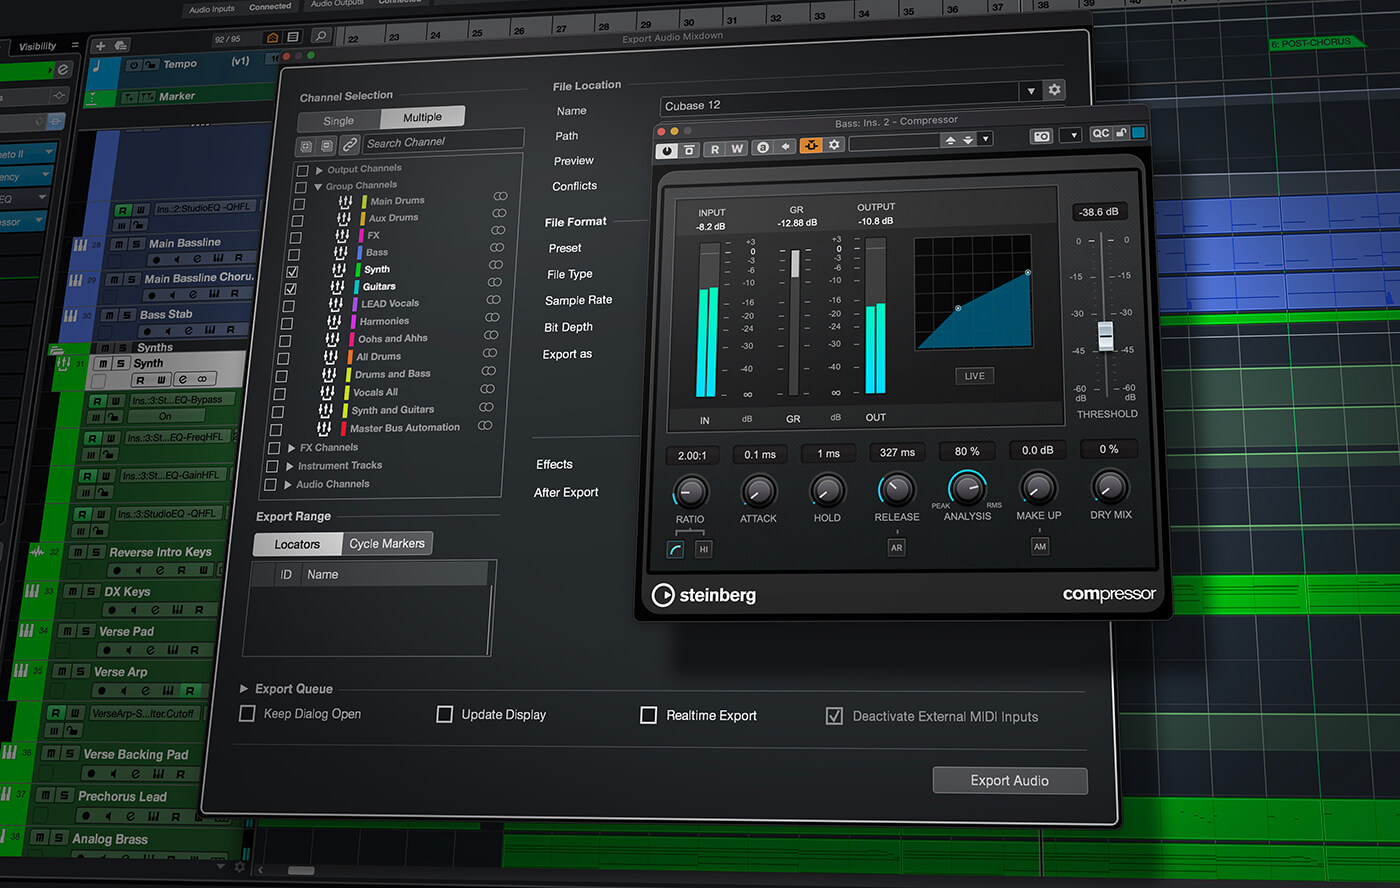 Steinberg Cubase Pro 12 - Audio export with sidechain support